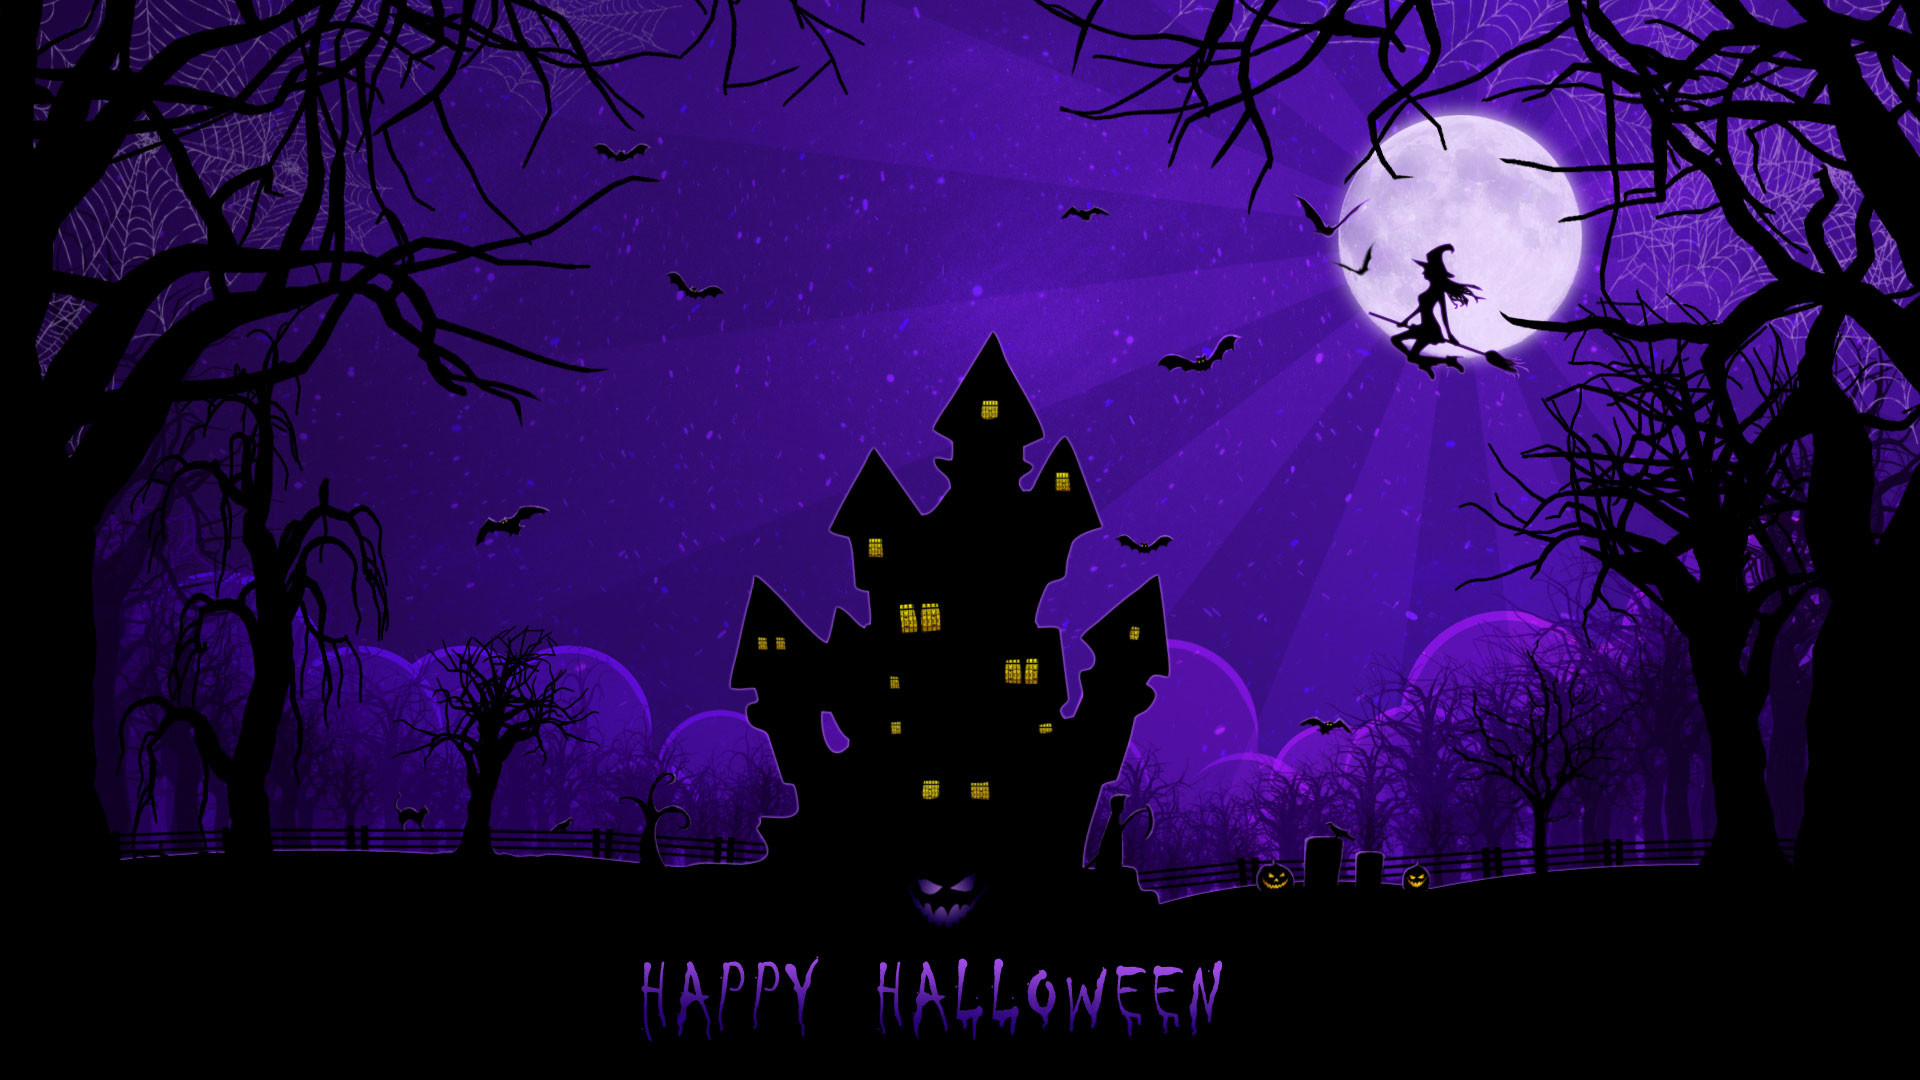 Scary Halloween Wallpapers and Screensavers 58 images 